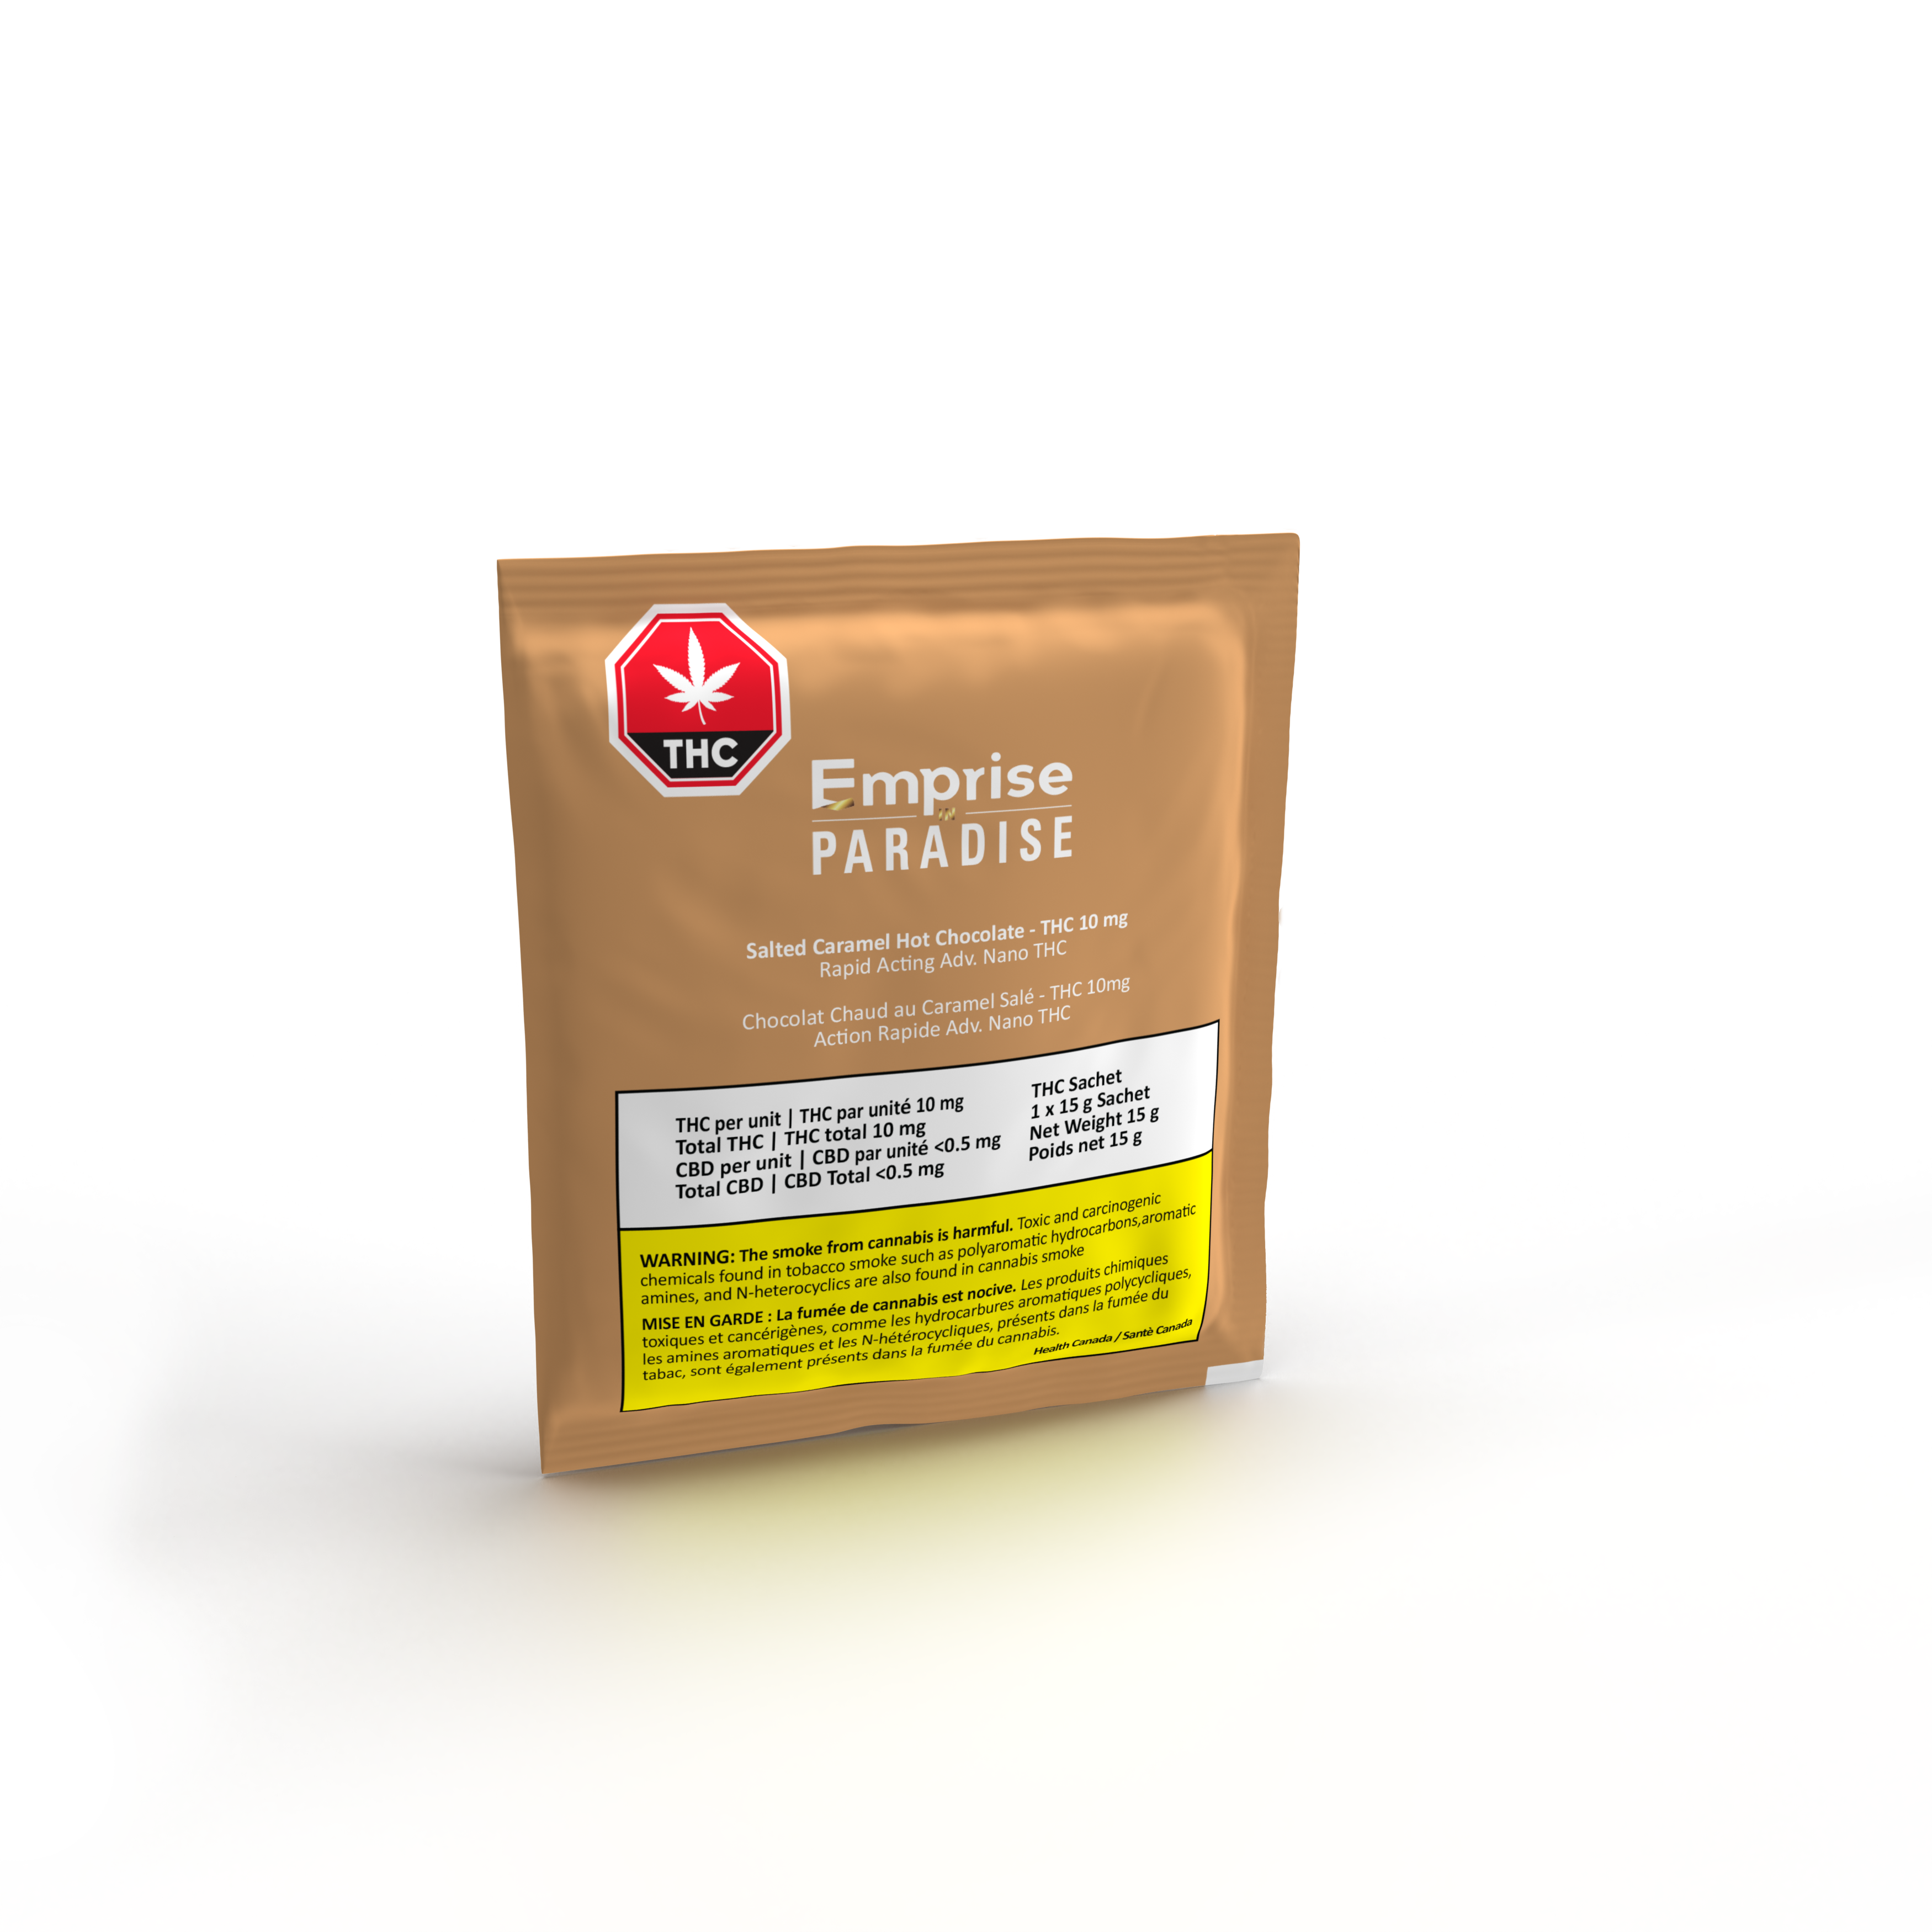 Cannabis Product Salted Caramel Vegan & Organic Hot Chocolate - 10mg Rapid Nano THC by Emprise in Paradise